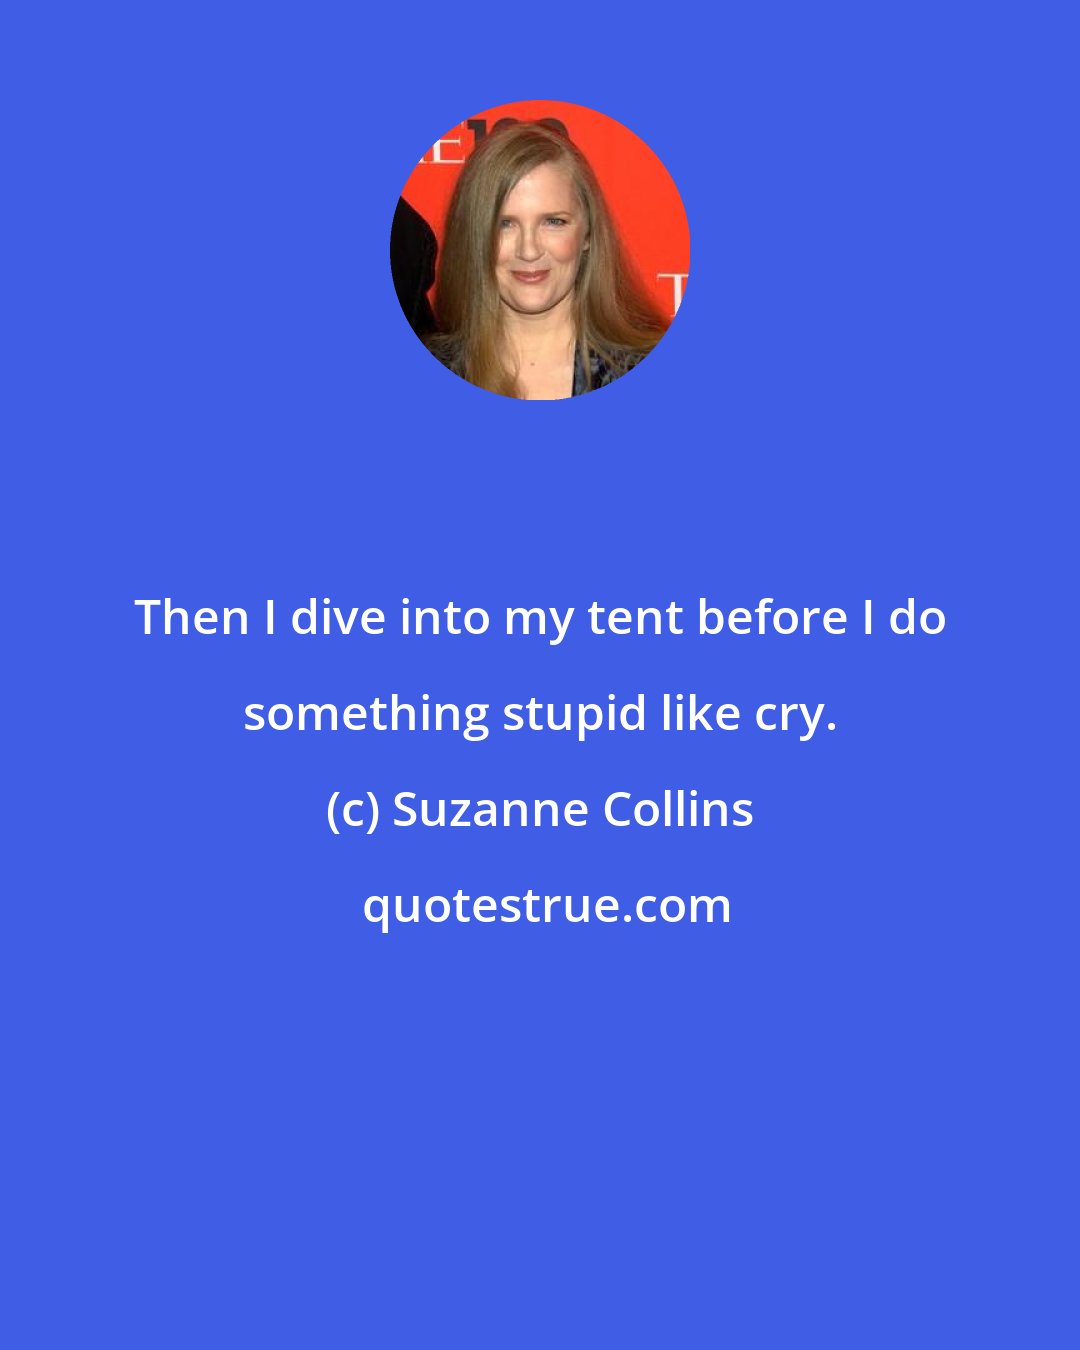 Suzanne Collins: Then I dive into my tent before I do something stupid like cry.